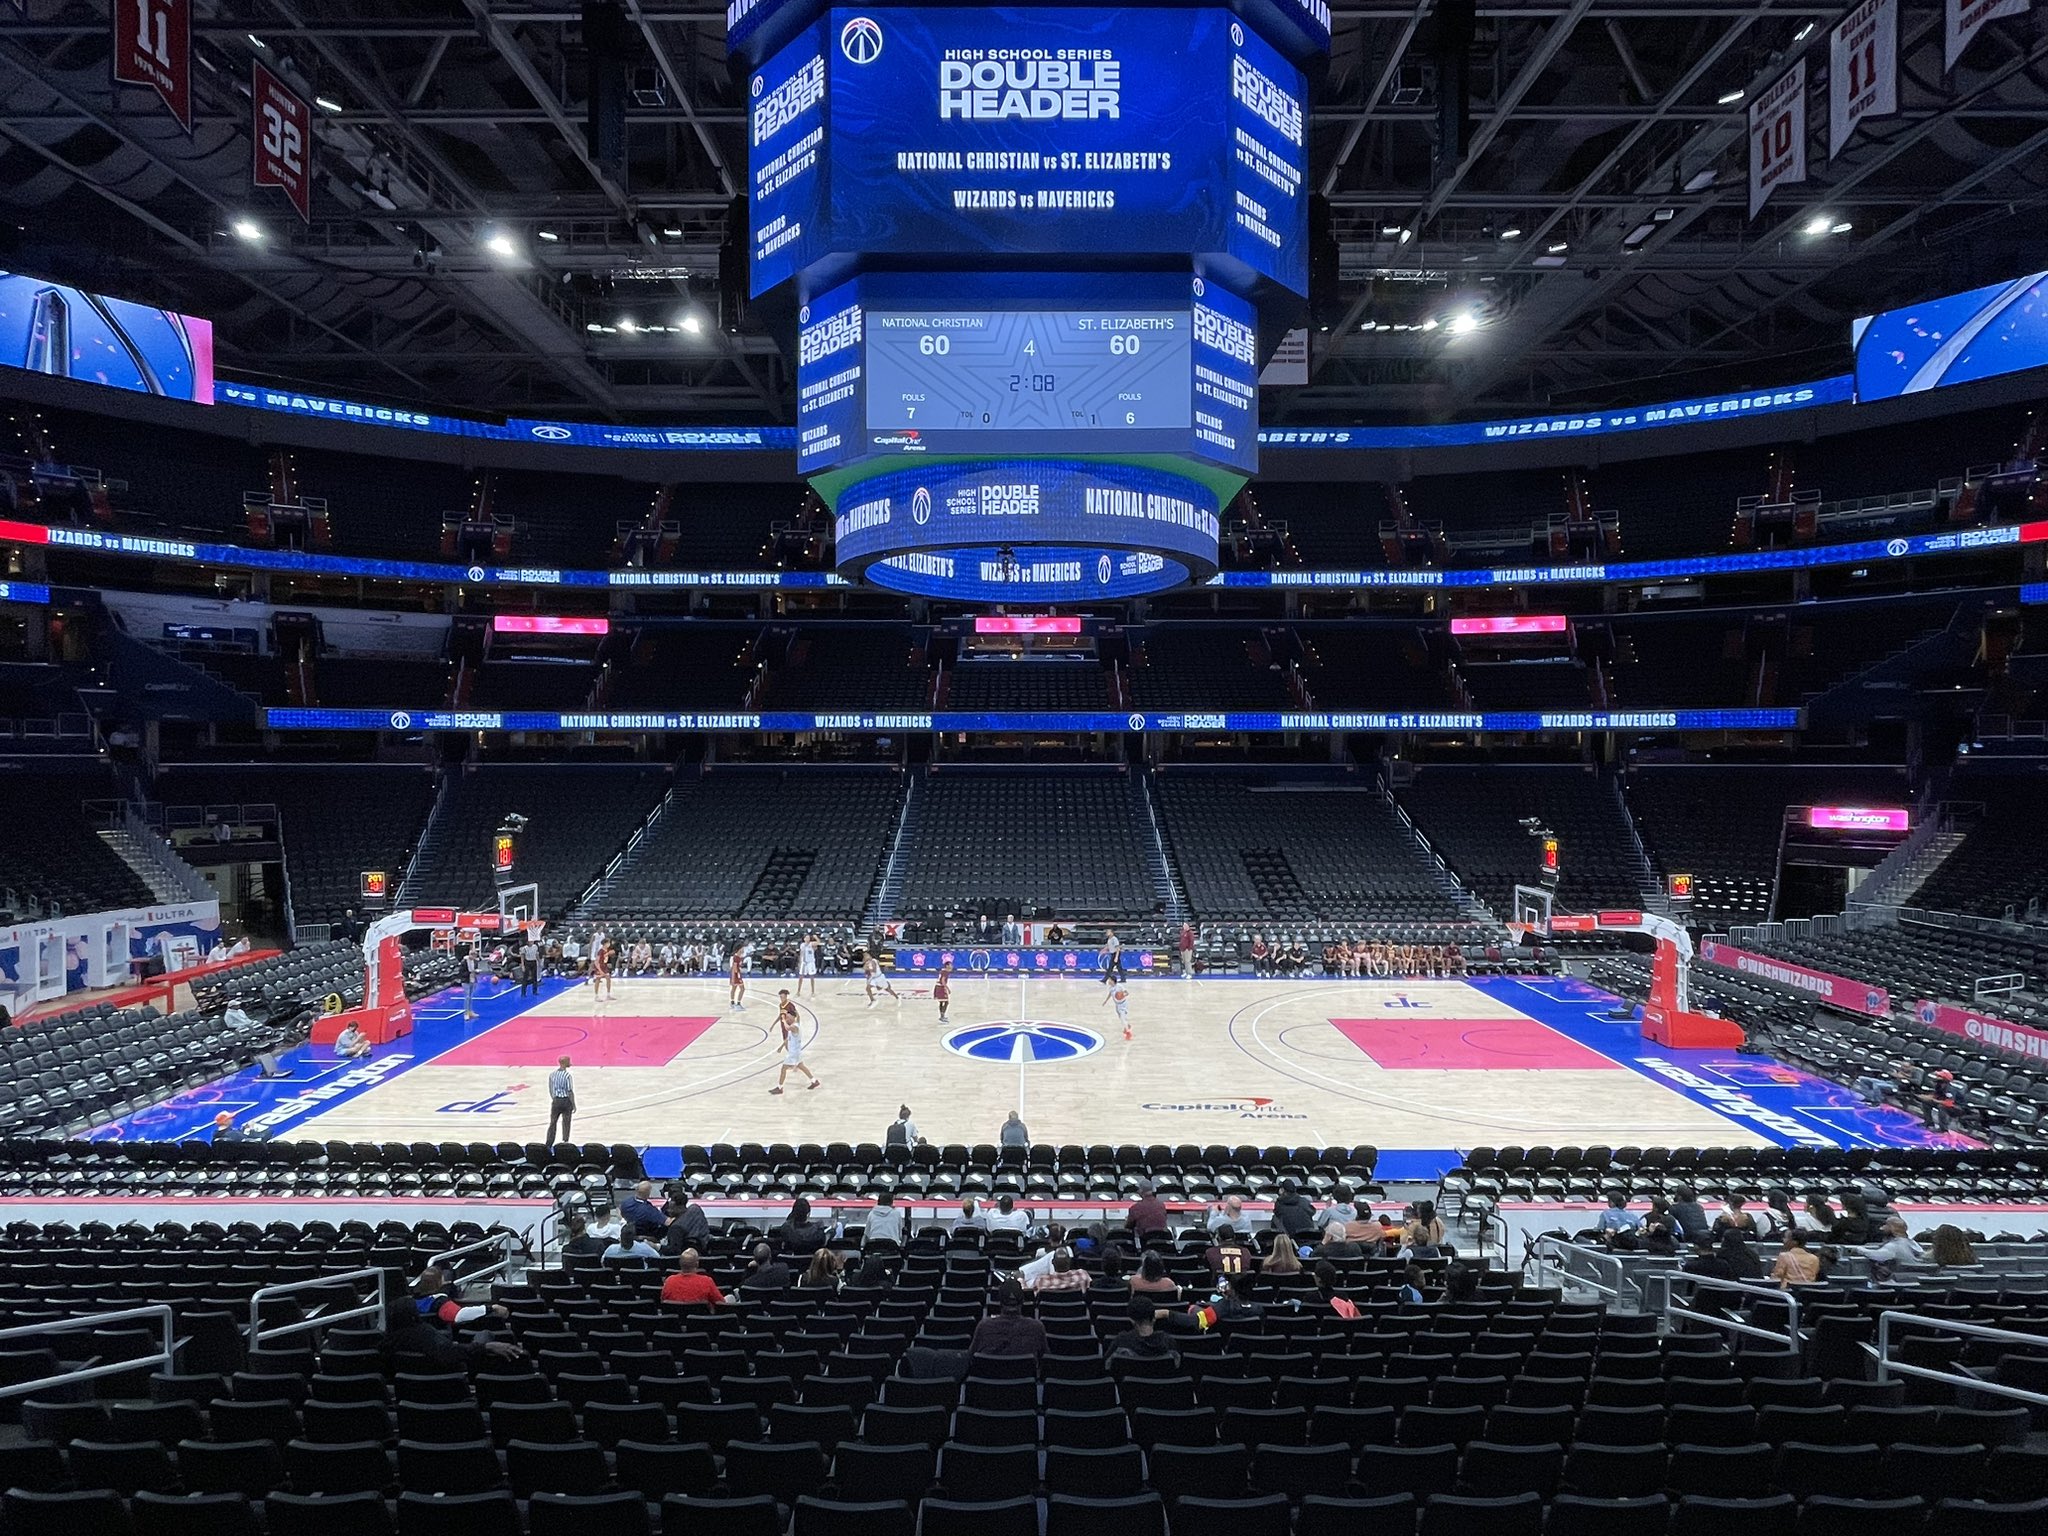 Josh Robbins on X: Here's a look at the Washington Wizards' new cherry  blossom-themed court, which will debut tonight when the team hosts the  Mavericks.  / X